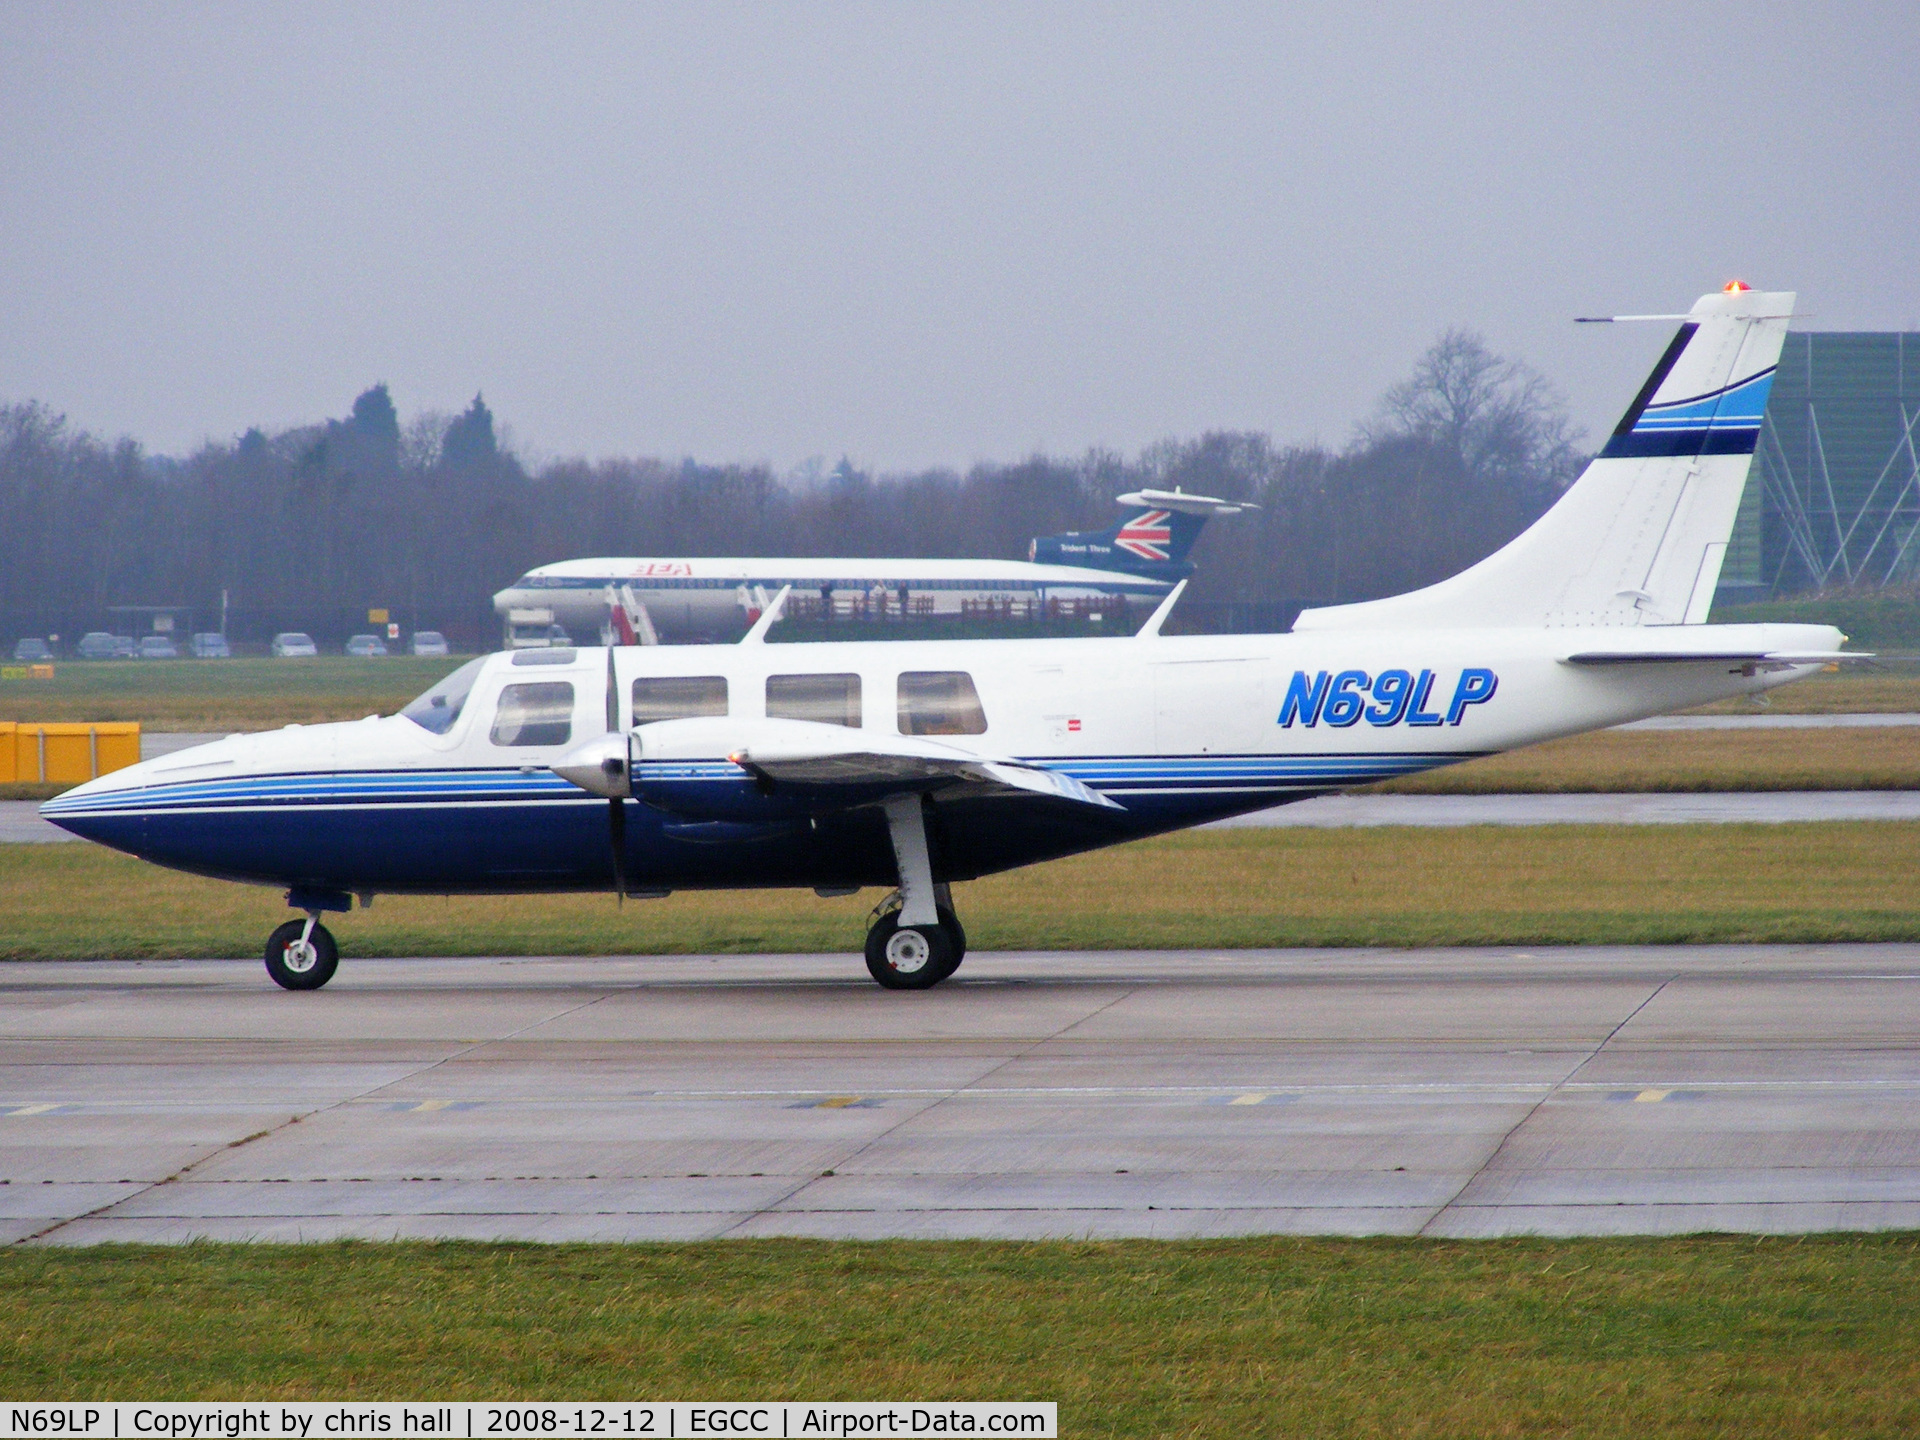 N69LP, 1978 Piper PA-60-601P Aerostar C/N 61P-0541-230, departing from Manchester